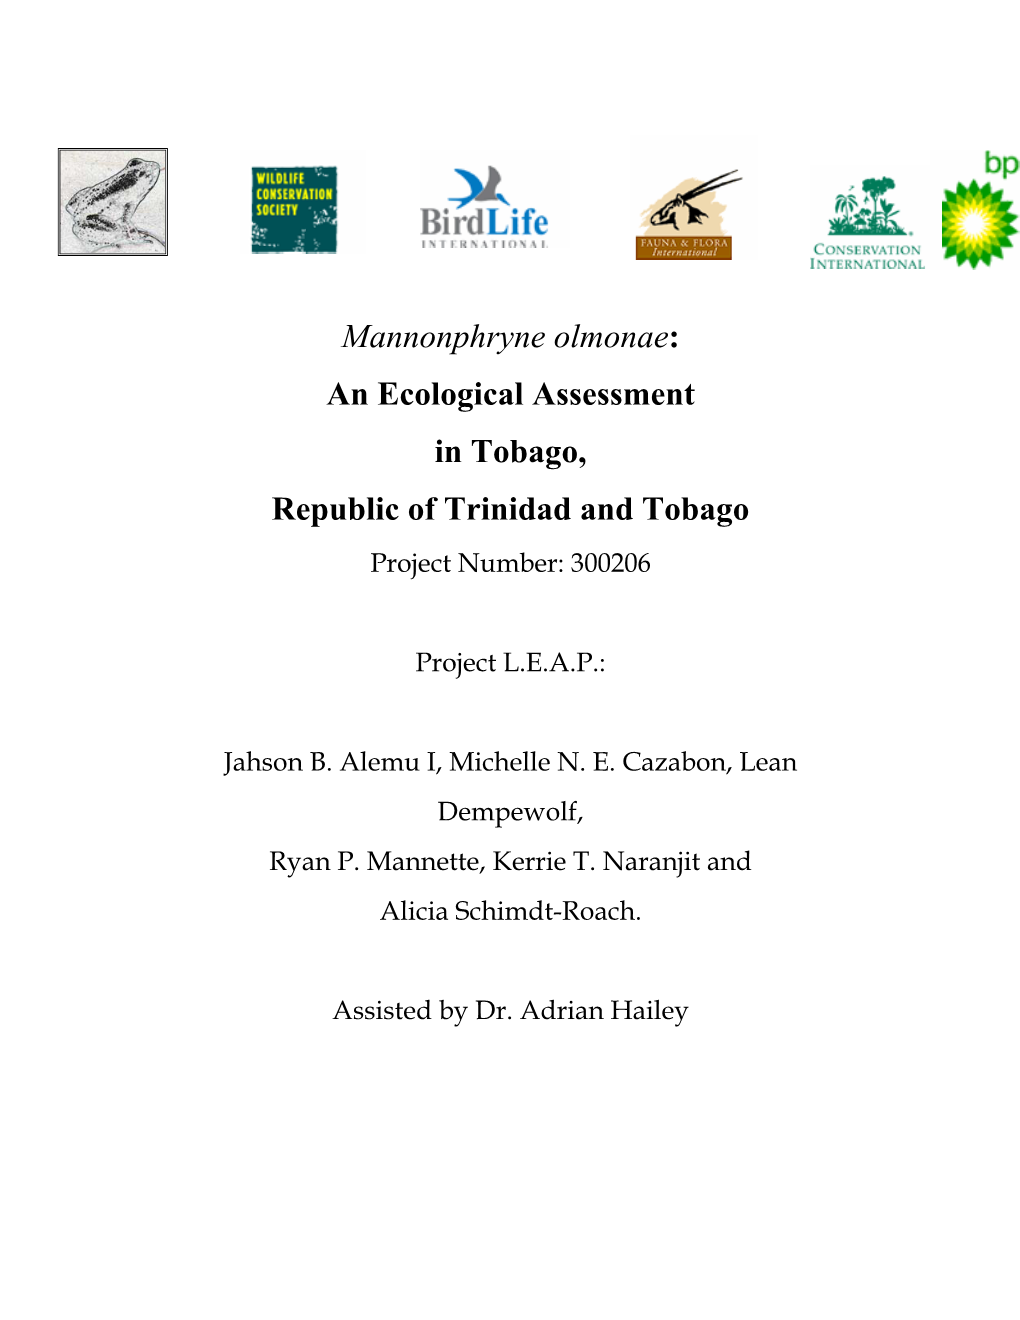 An Ecological Assessment in Tobago, Republic of Trinidad and Tobago Project Number: 300206